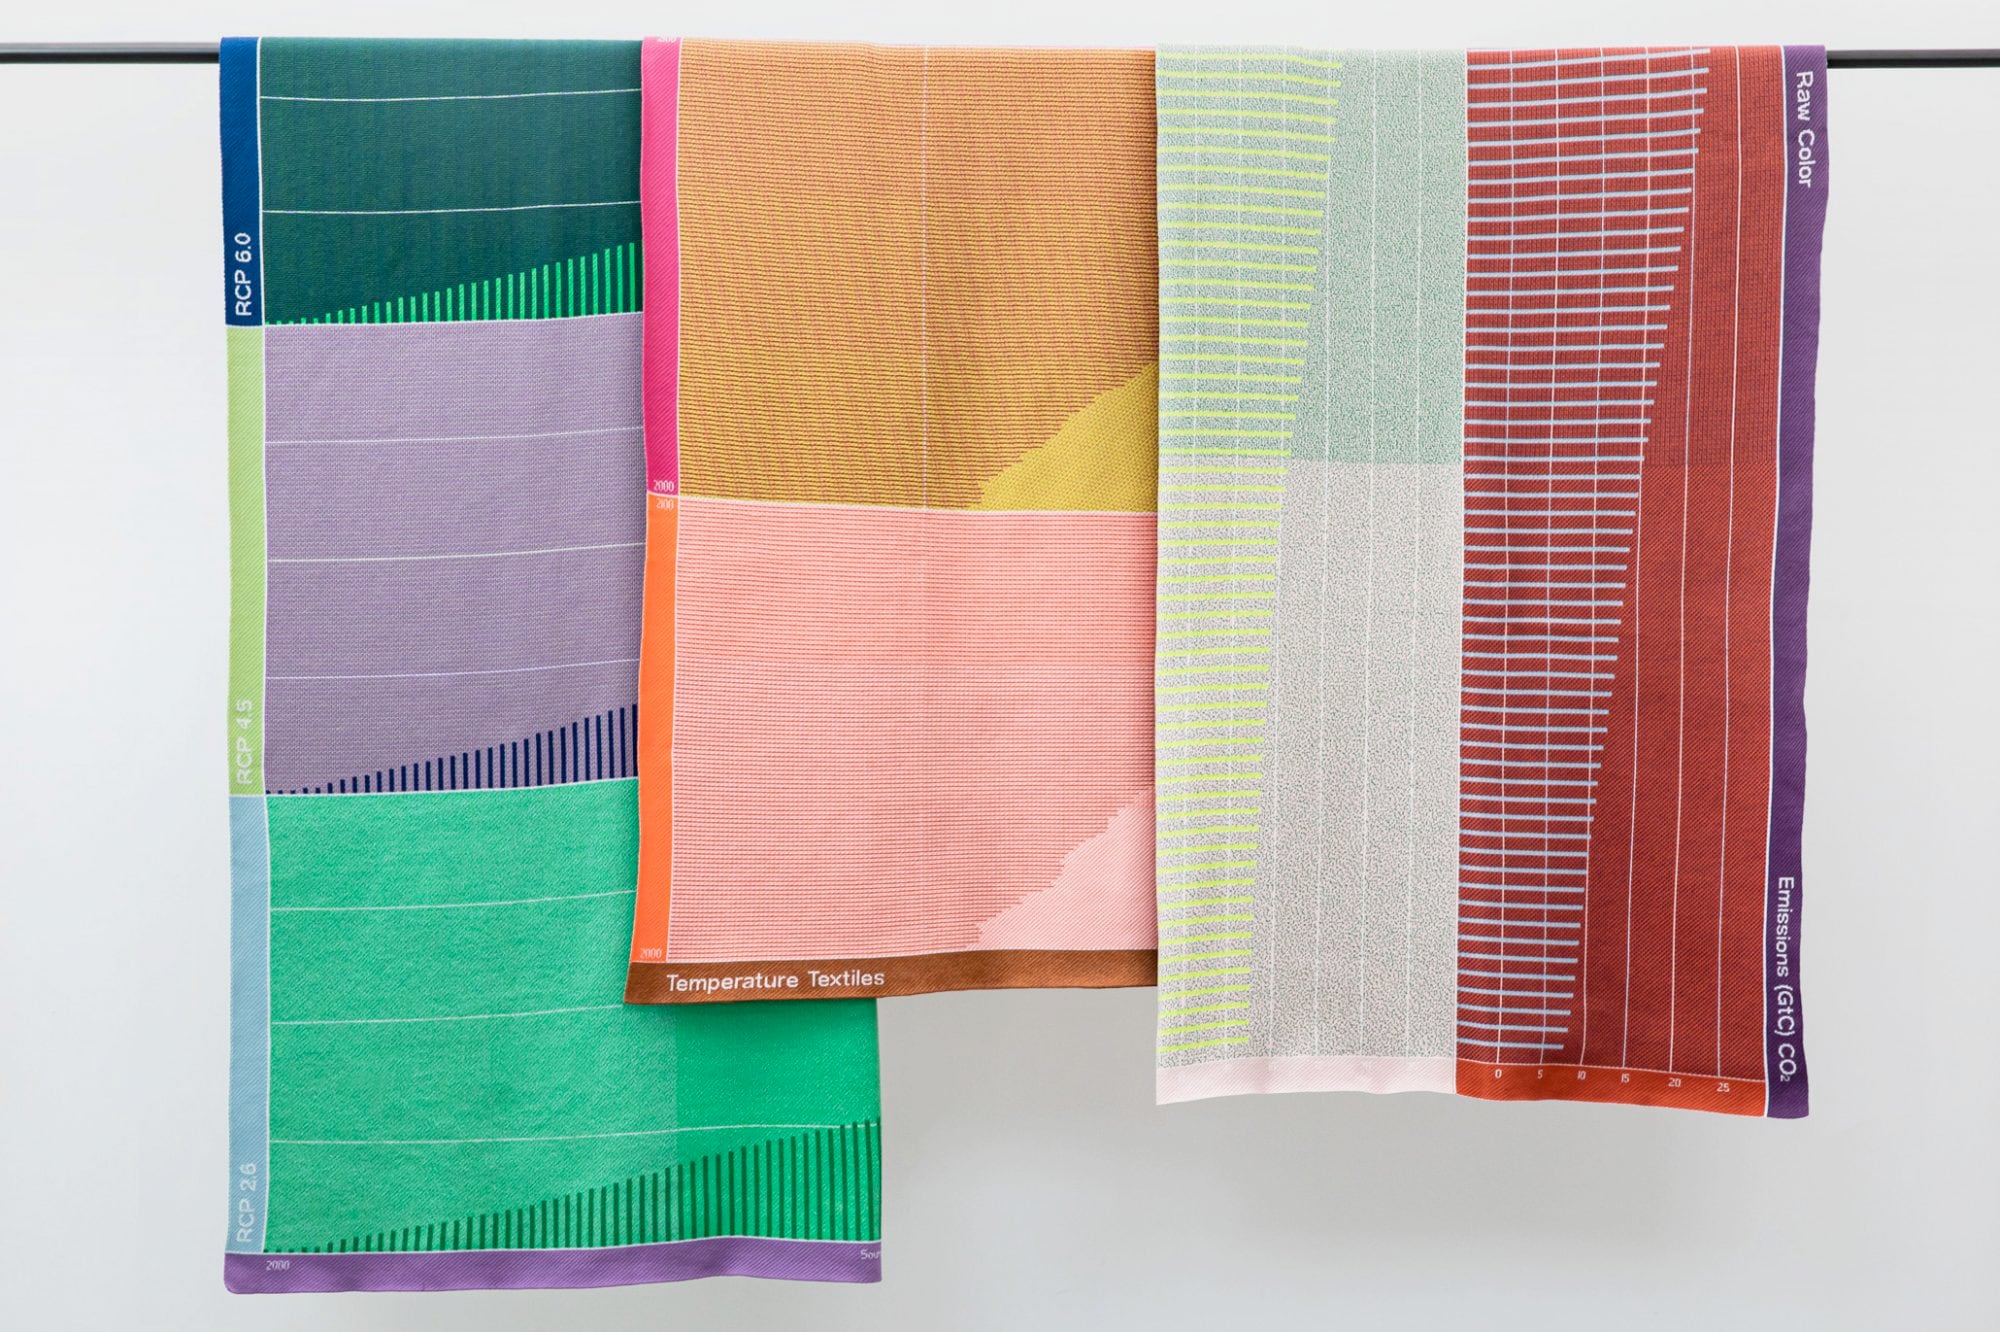 Temperature Textiles Translate Climate Crisis Data into Colorful, Graphic Knits